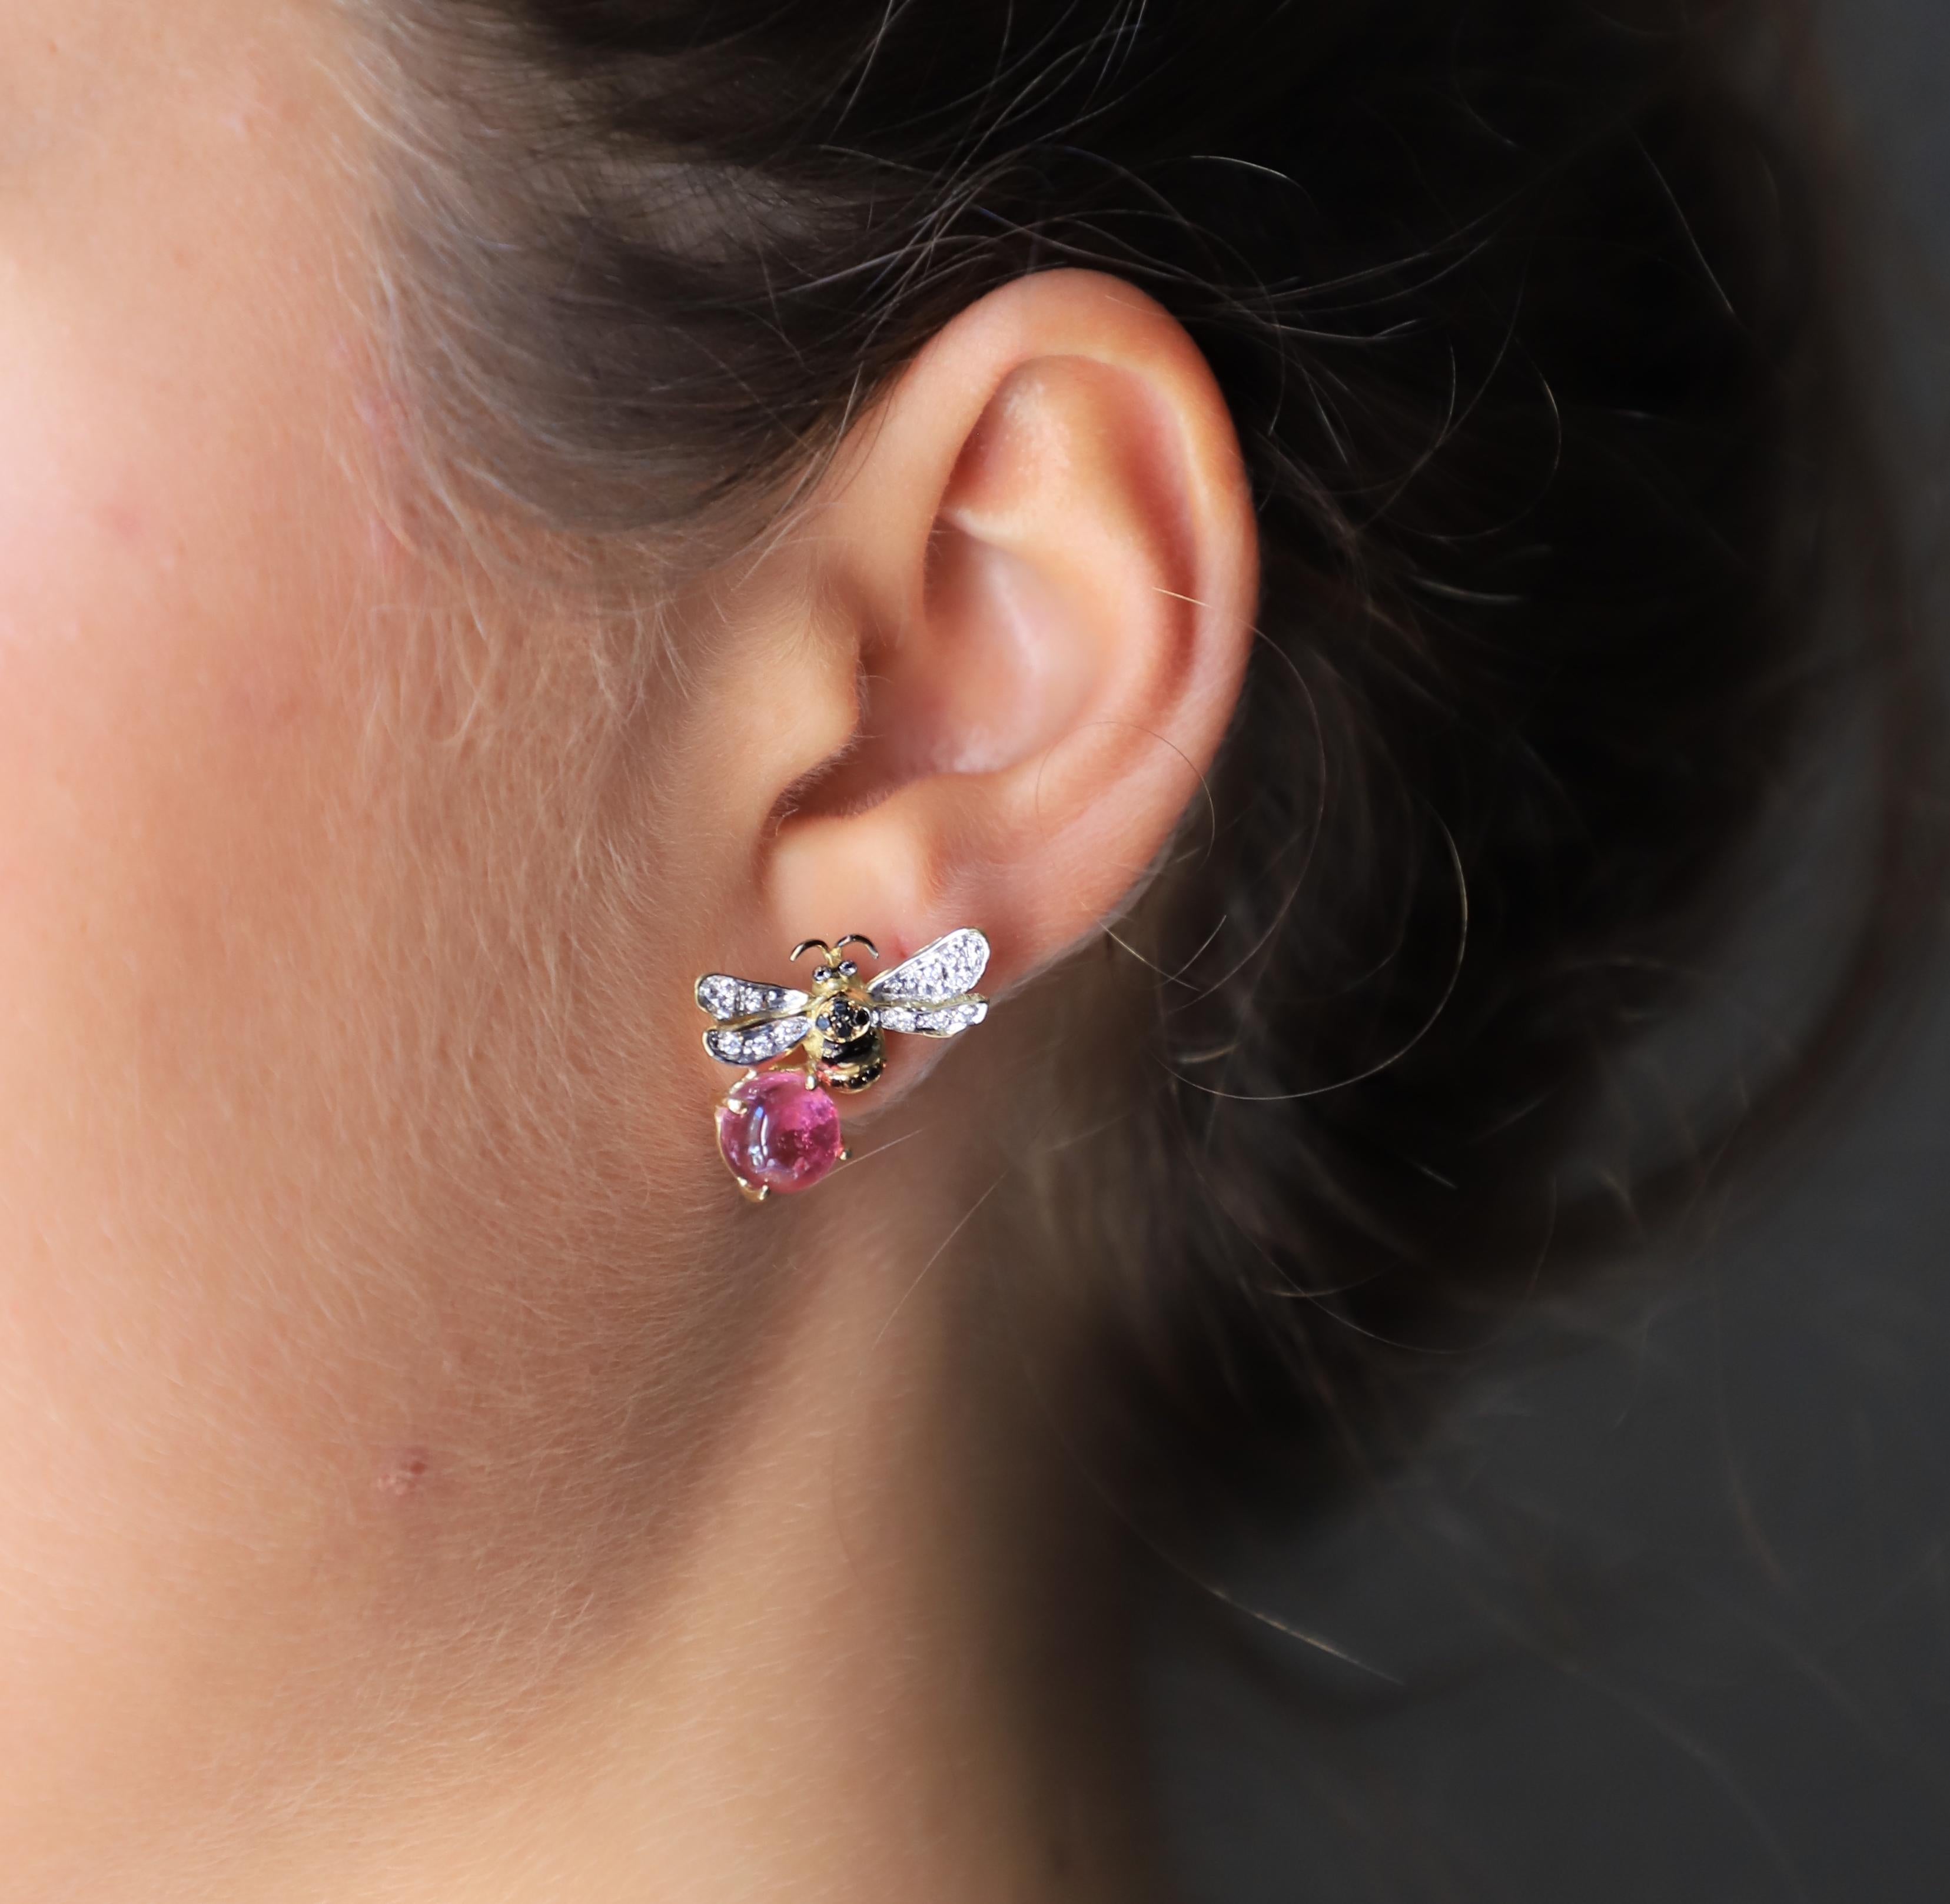 Rossella Ugolini Design Collection made for bee enthusiasts and earring lovers.
Feast your eyes on our exclusive pair of Bees Stud Earrings, meticulously handcrafted in Italy with the utmost precision and creativity. These earrings are not just